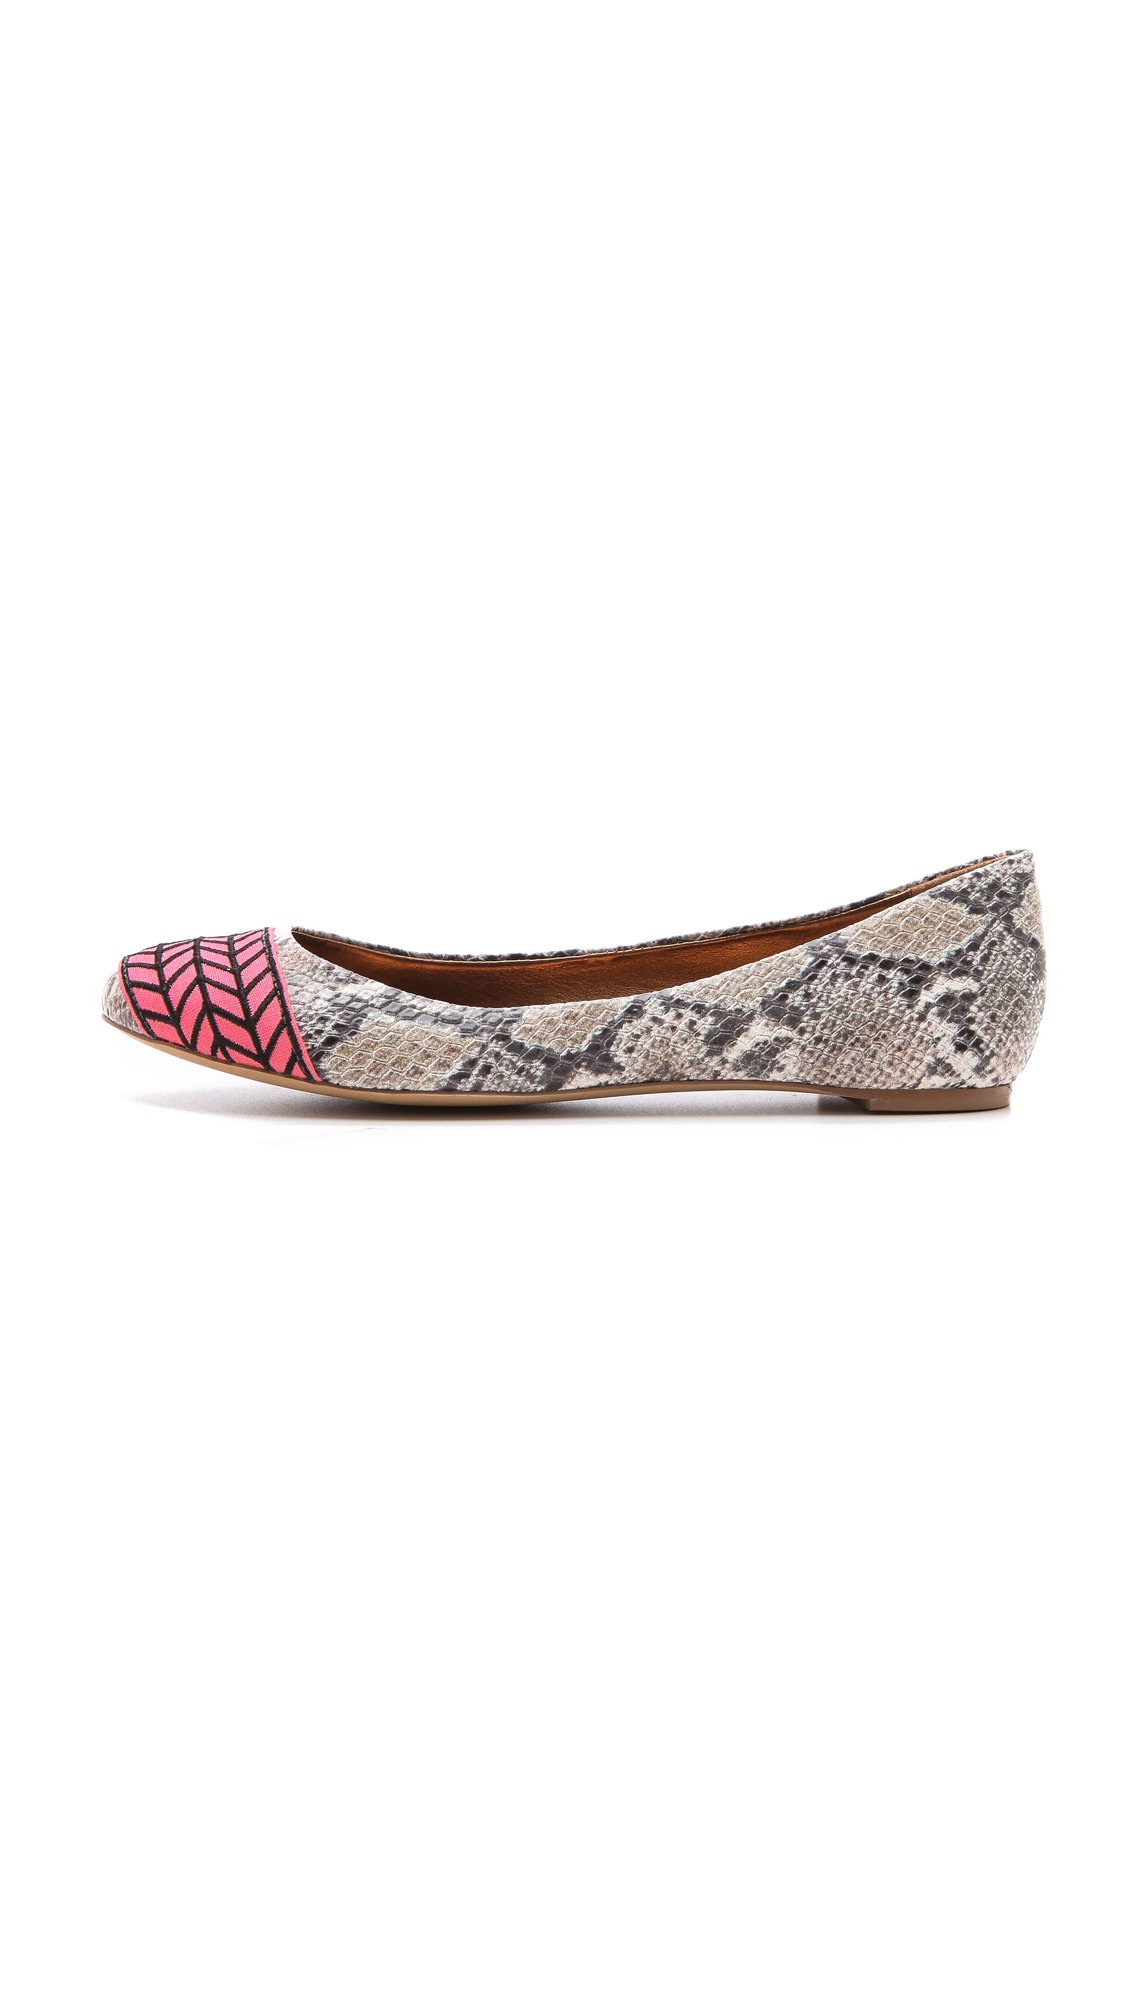 Lyst - Twelfth street cynthia vincent Embroidered Flats in Pink